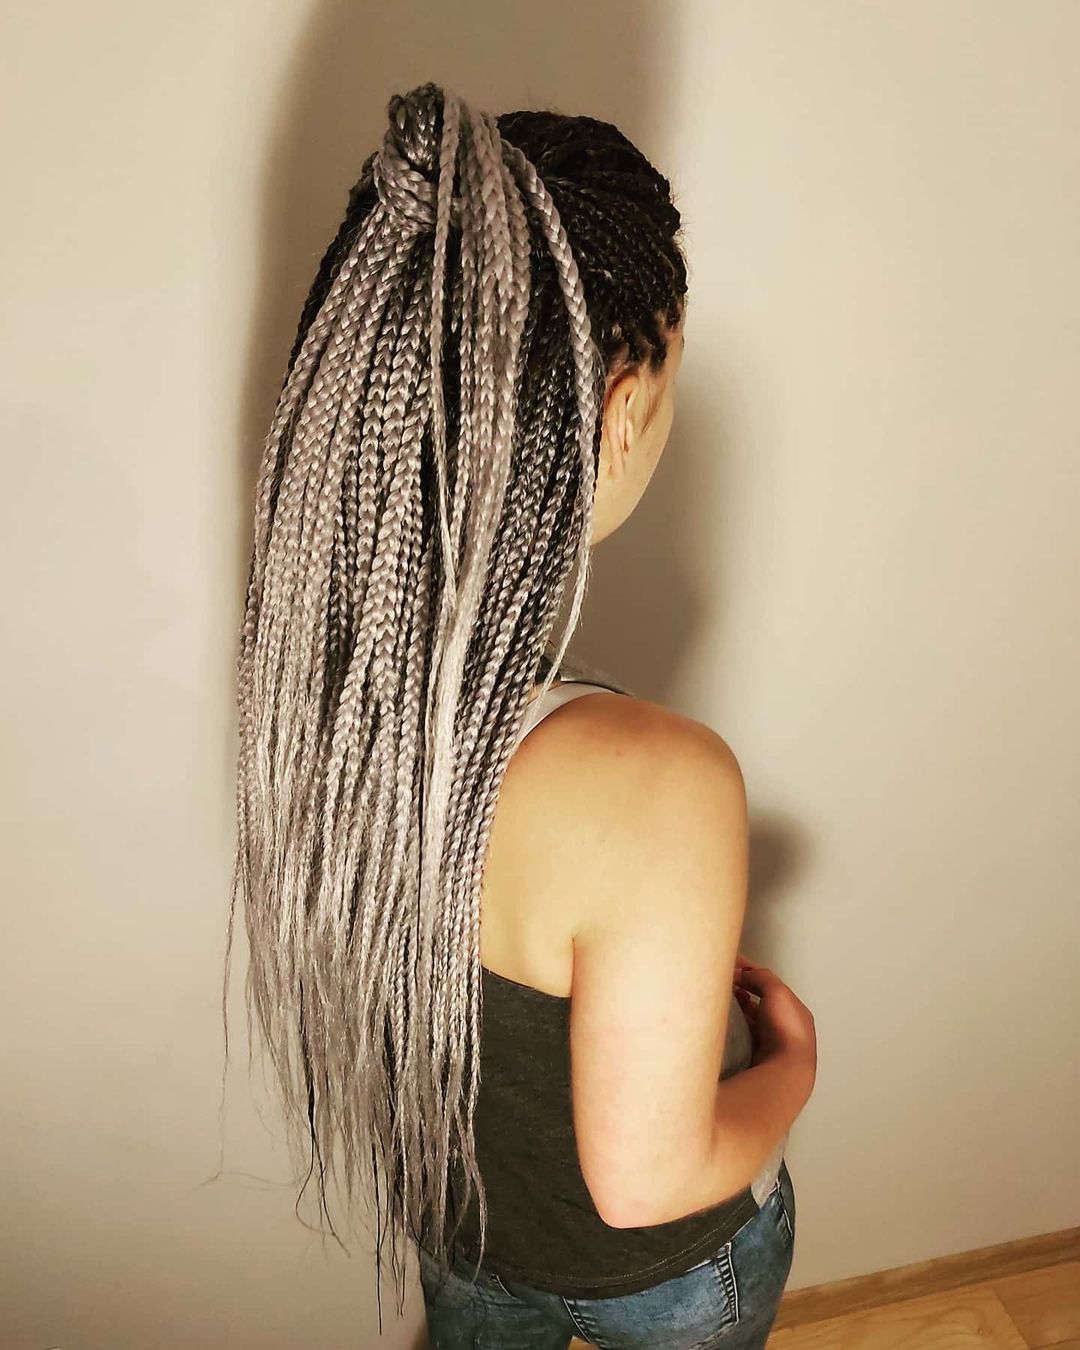 Braided Hairstyles - Braided Hairstyles - Ombre Box Braids